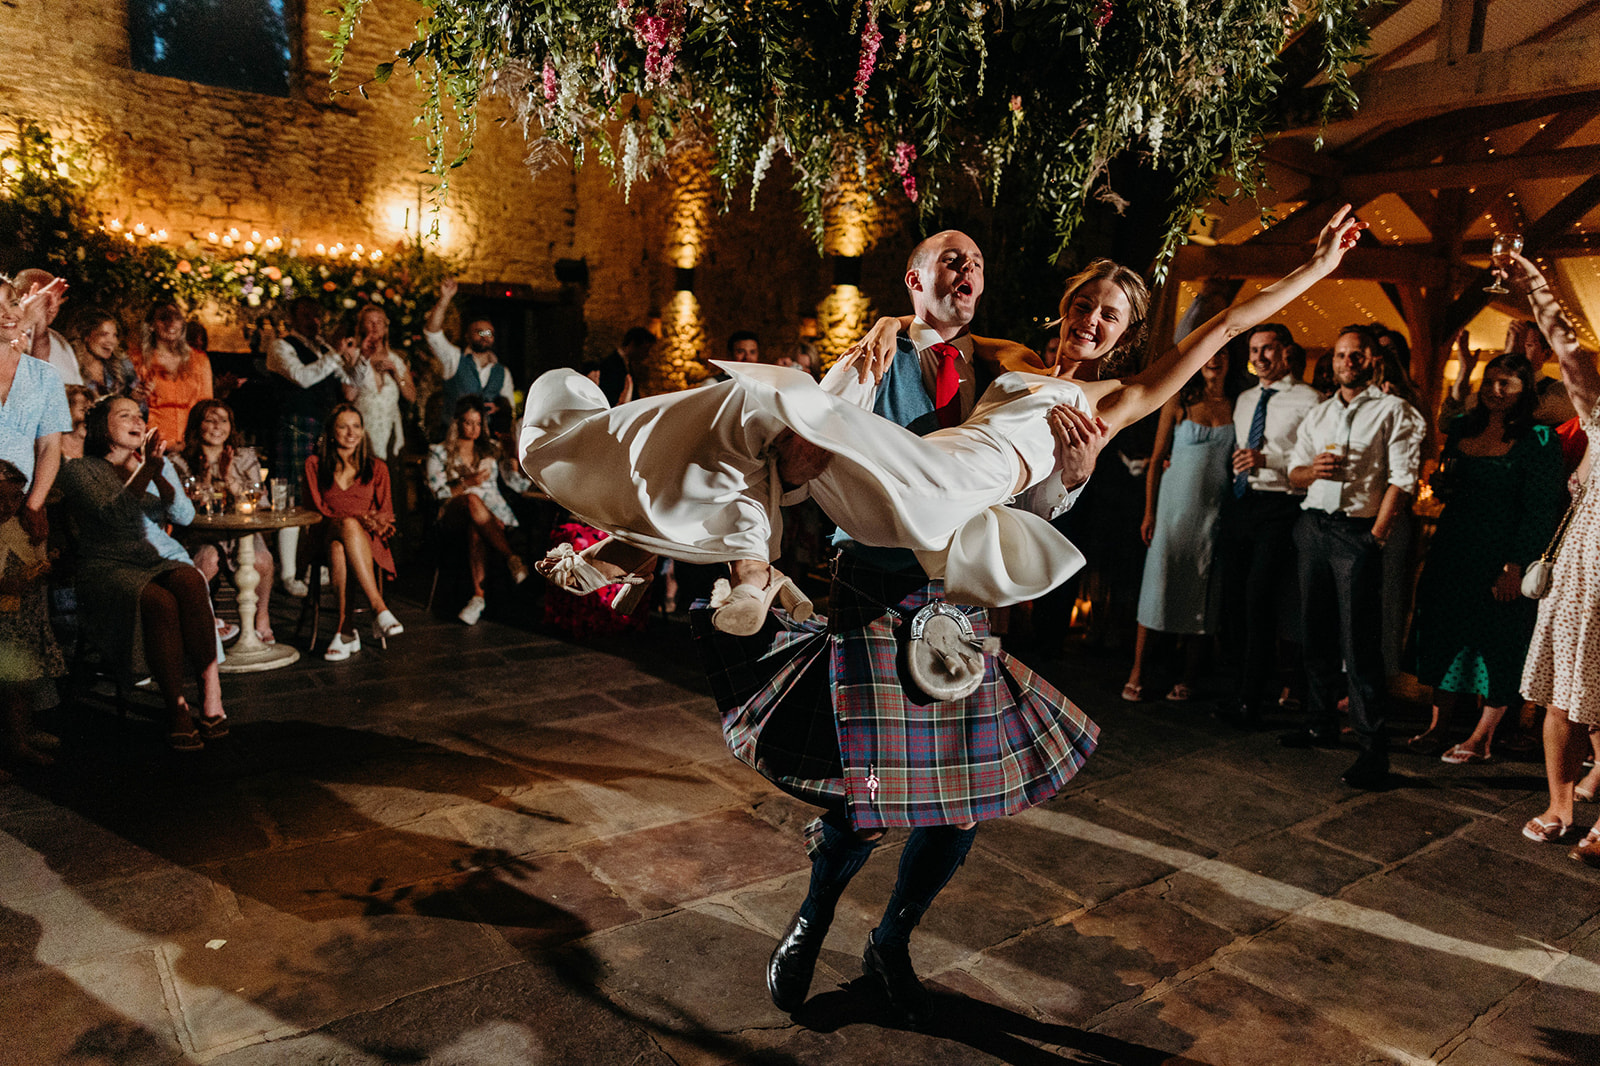 Documentary style image depicts a kilt-wearing groom carrying his bride across the dance floor, with guests applauding